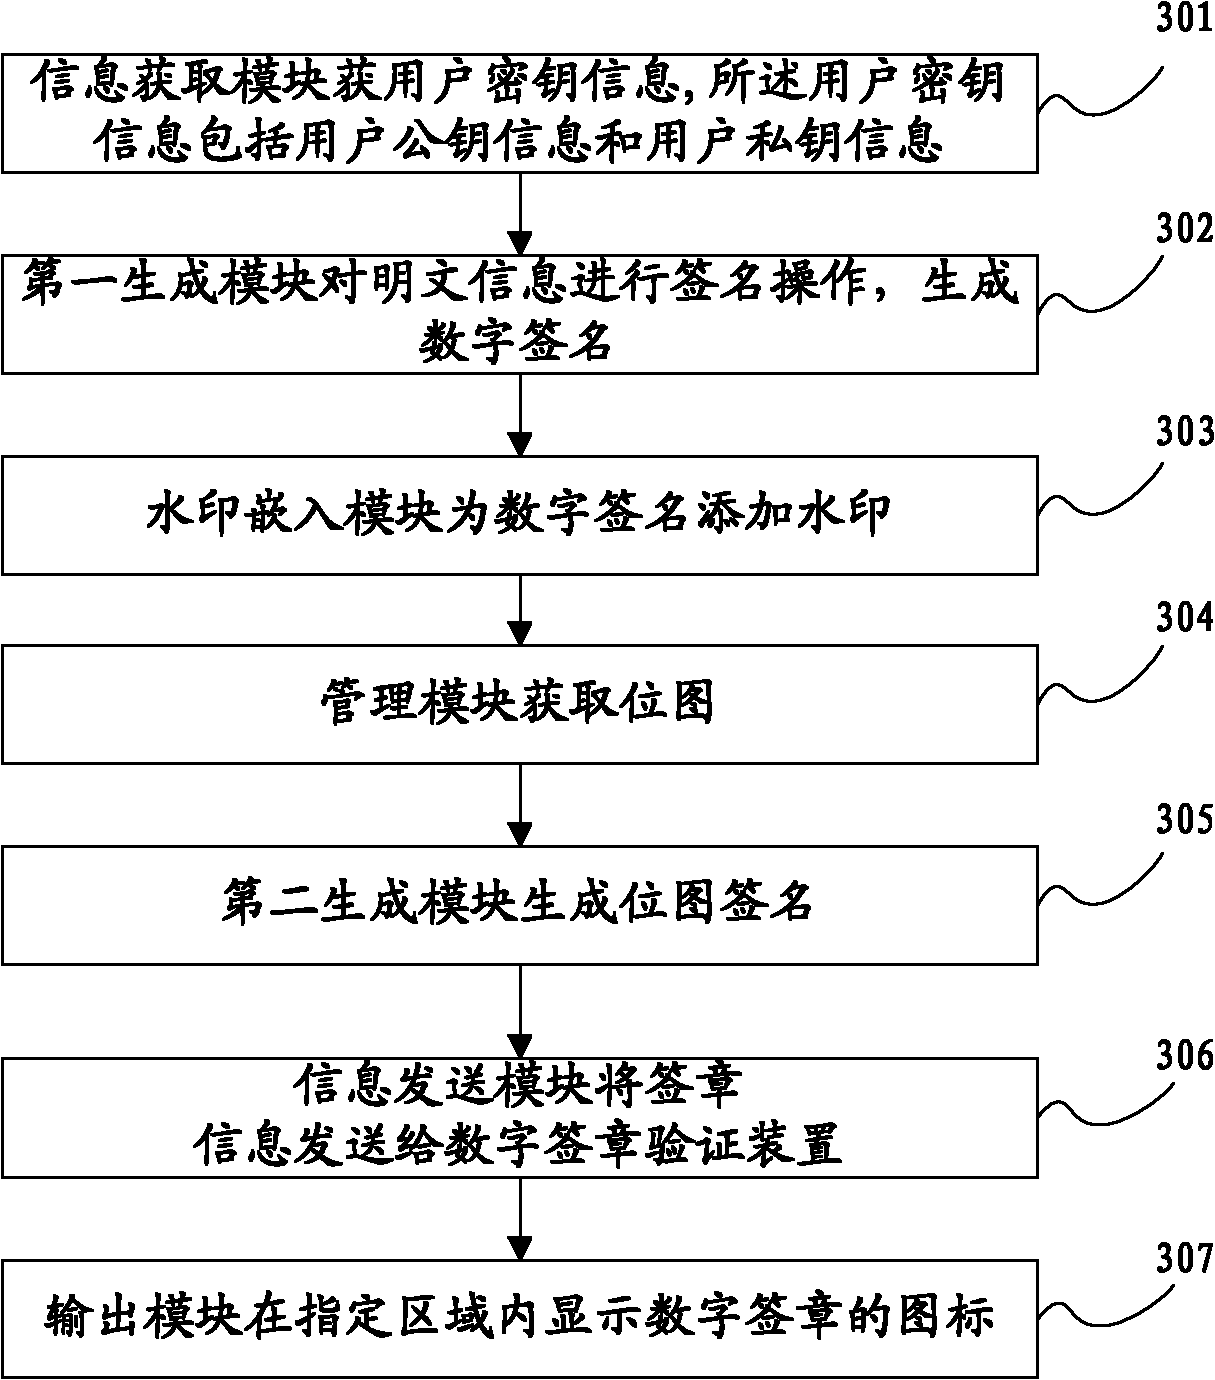 Digital signing system and method